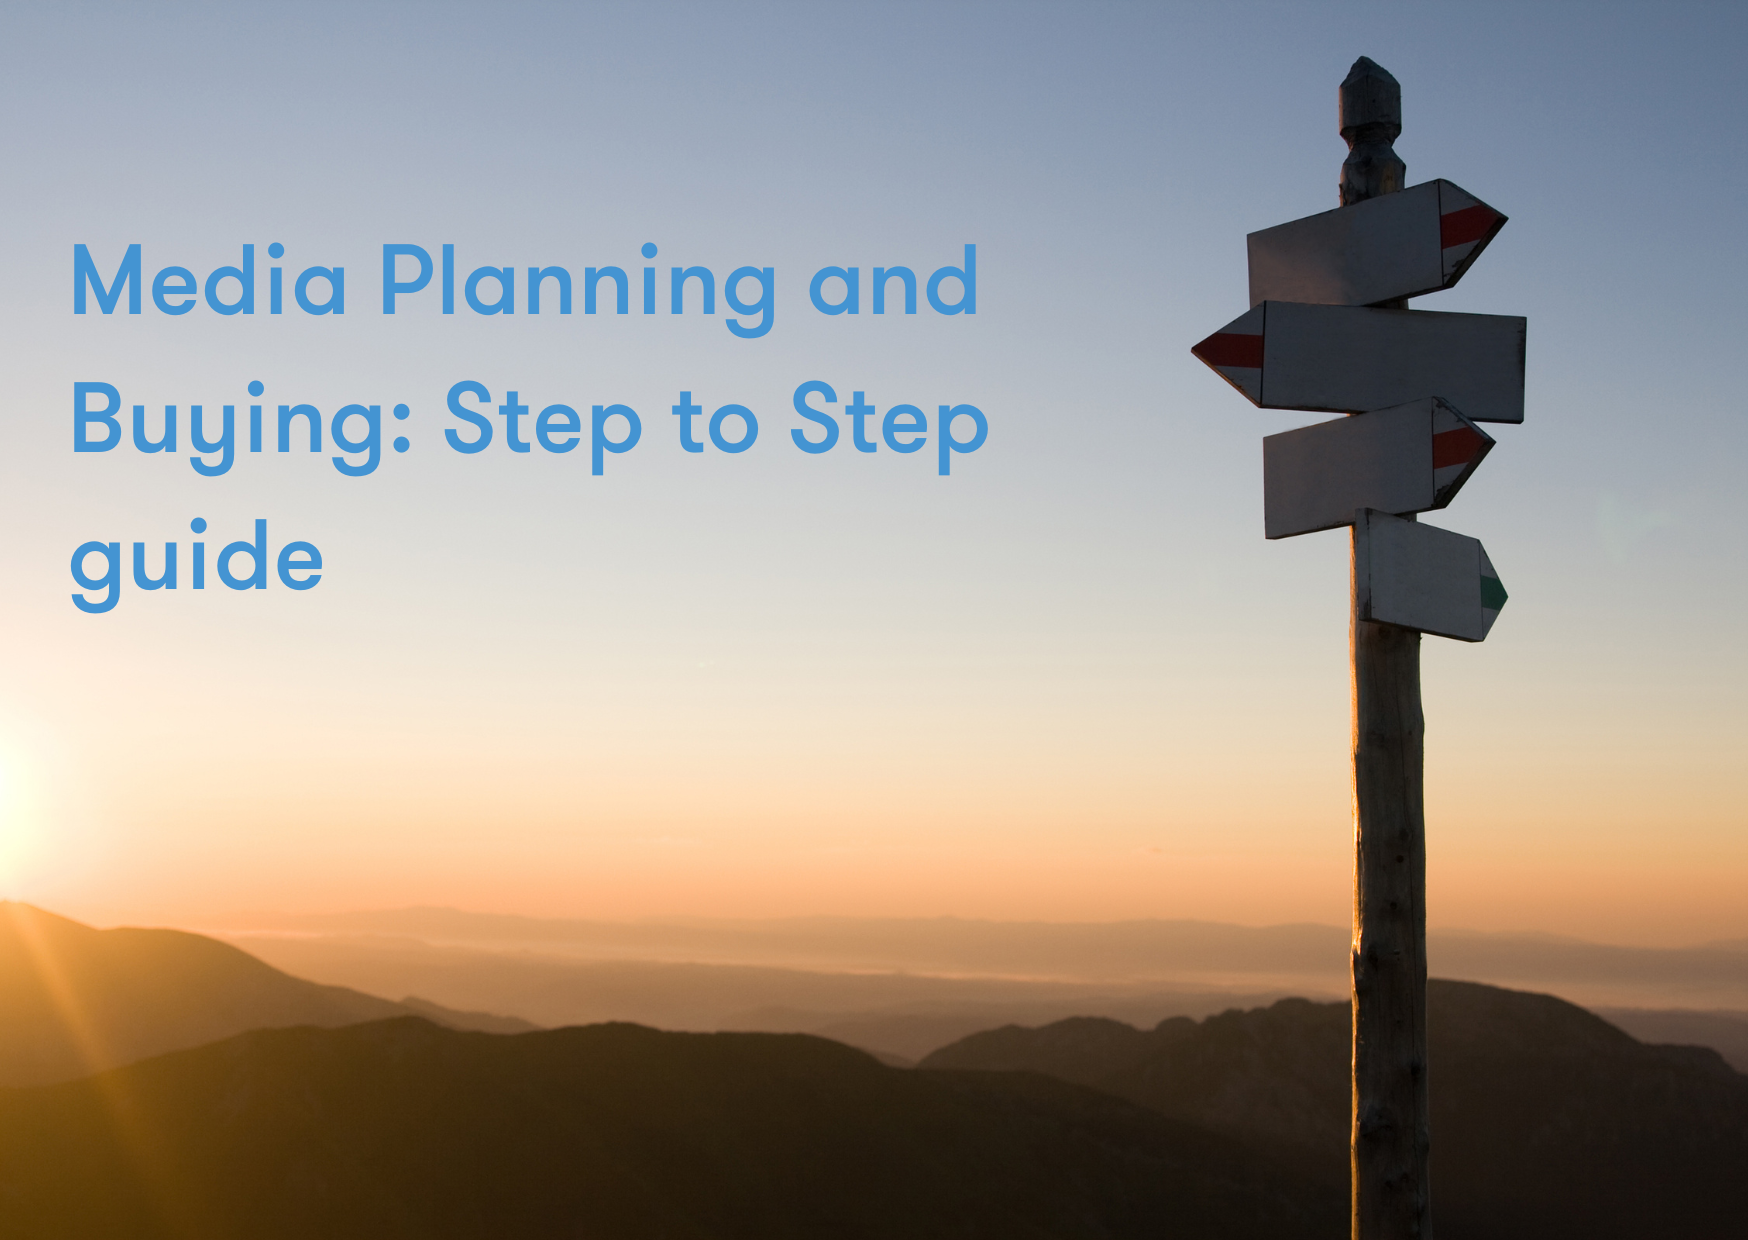 Media Planning and Buying: Step to Step guide